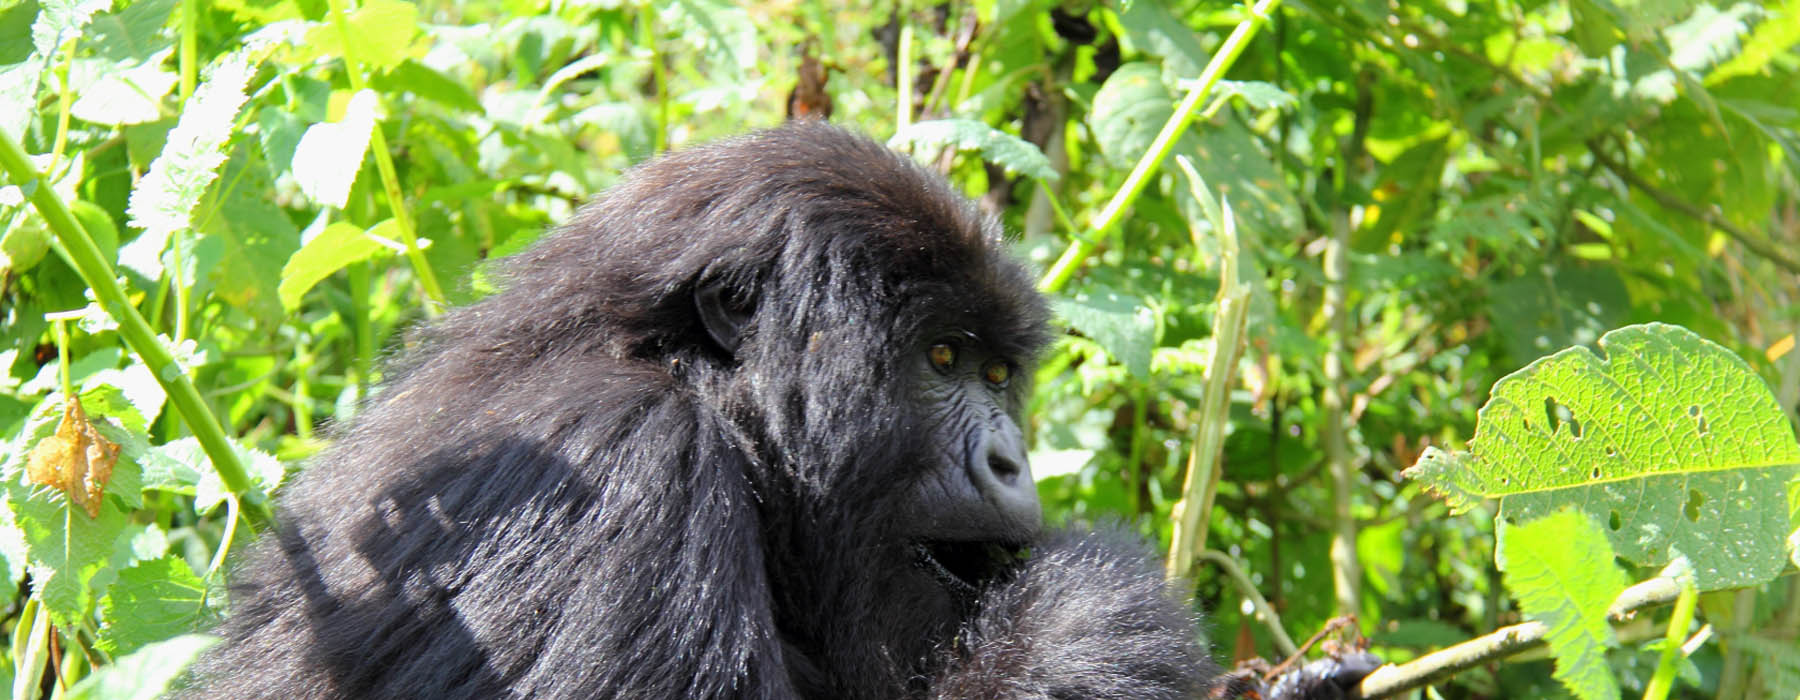 Your 4 days gorilla trekking adventure in Rwanda in Volcanoes NP will give you a life time experience that you will live to share with gorilla trekking in the mist of volcanoes, visit to the local market, Kigali city tour, and visit to genocide memorial ground and a cultural encounter which will give you a feel of the Rwandese culture, as you interact with them.